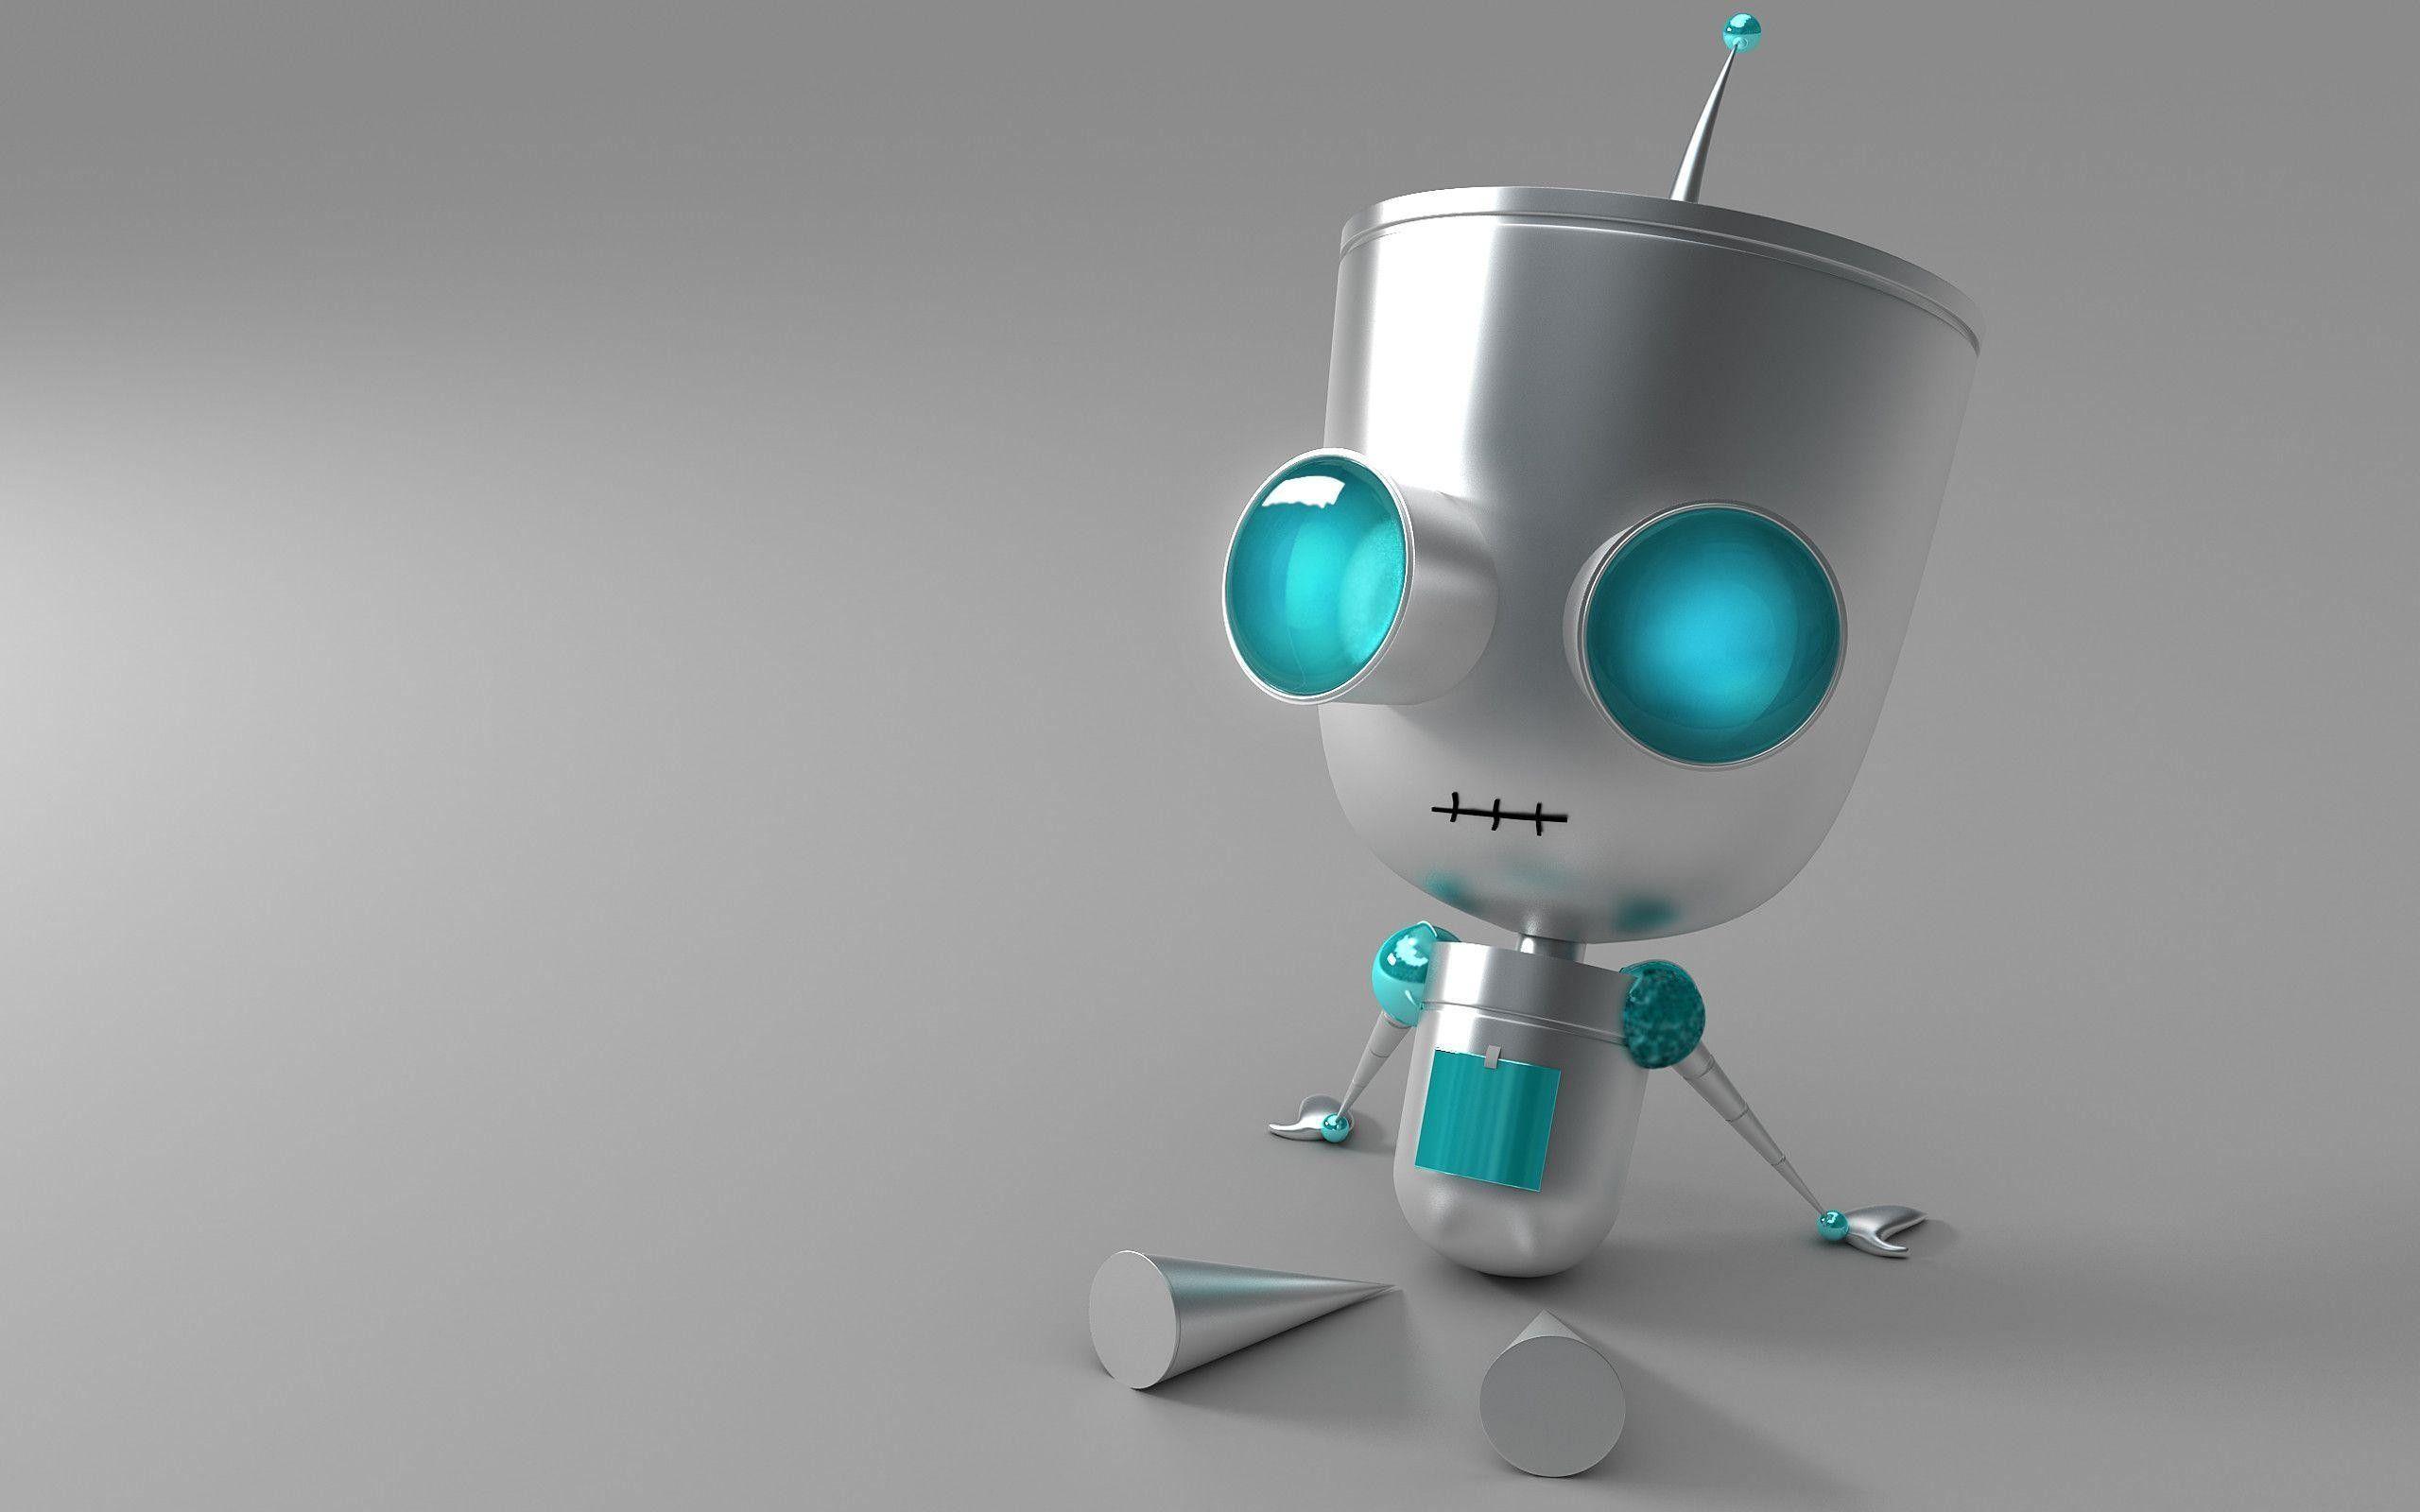 Wallpaper Robot Android Artificial Intelligence Toy Art Background   Download Free Image